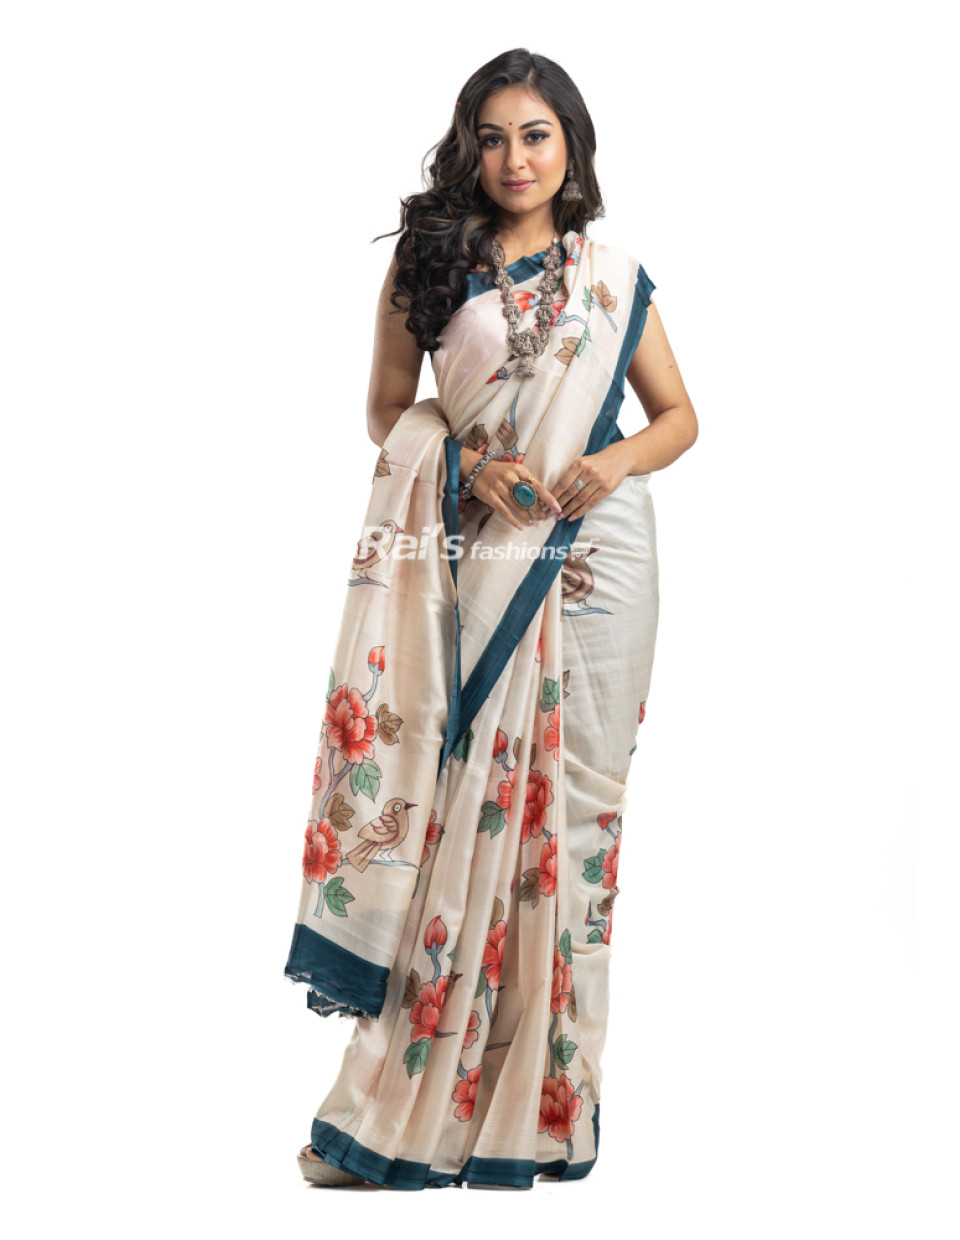 Pure Bishnupuri Silk Saree With Floral Print And Contrast Color Border - With Silk Mark (KR2189)